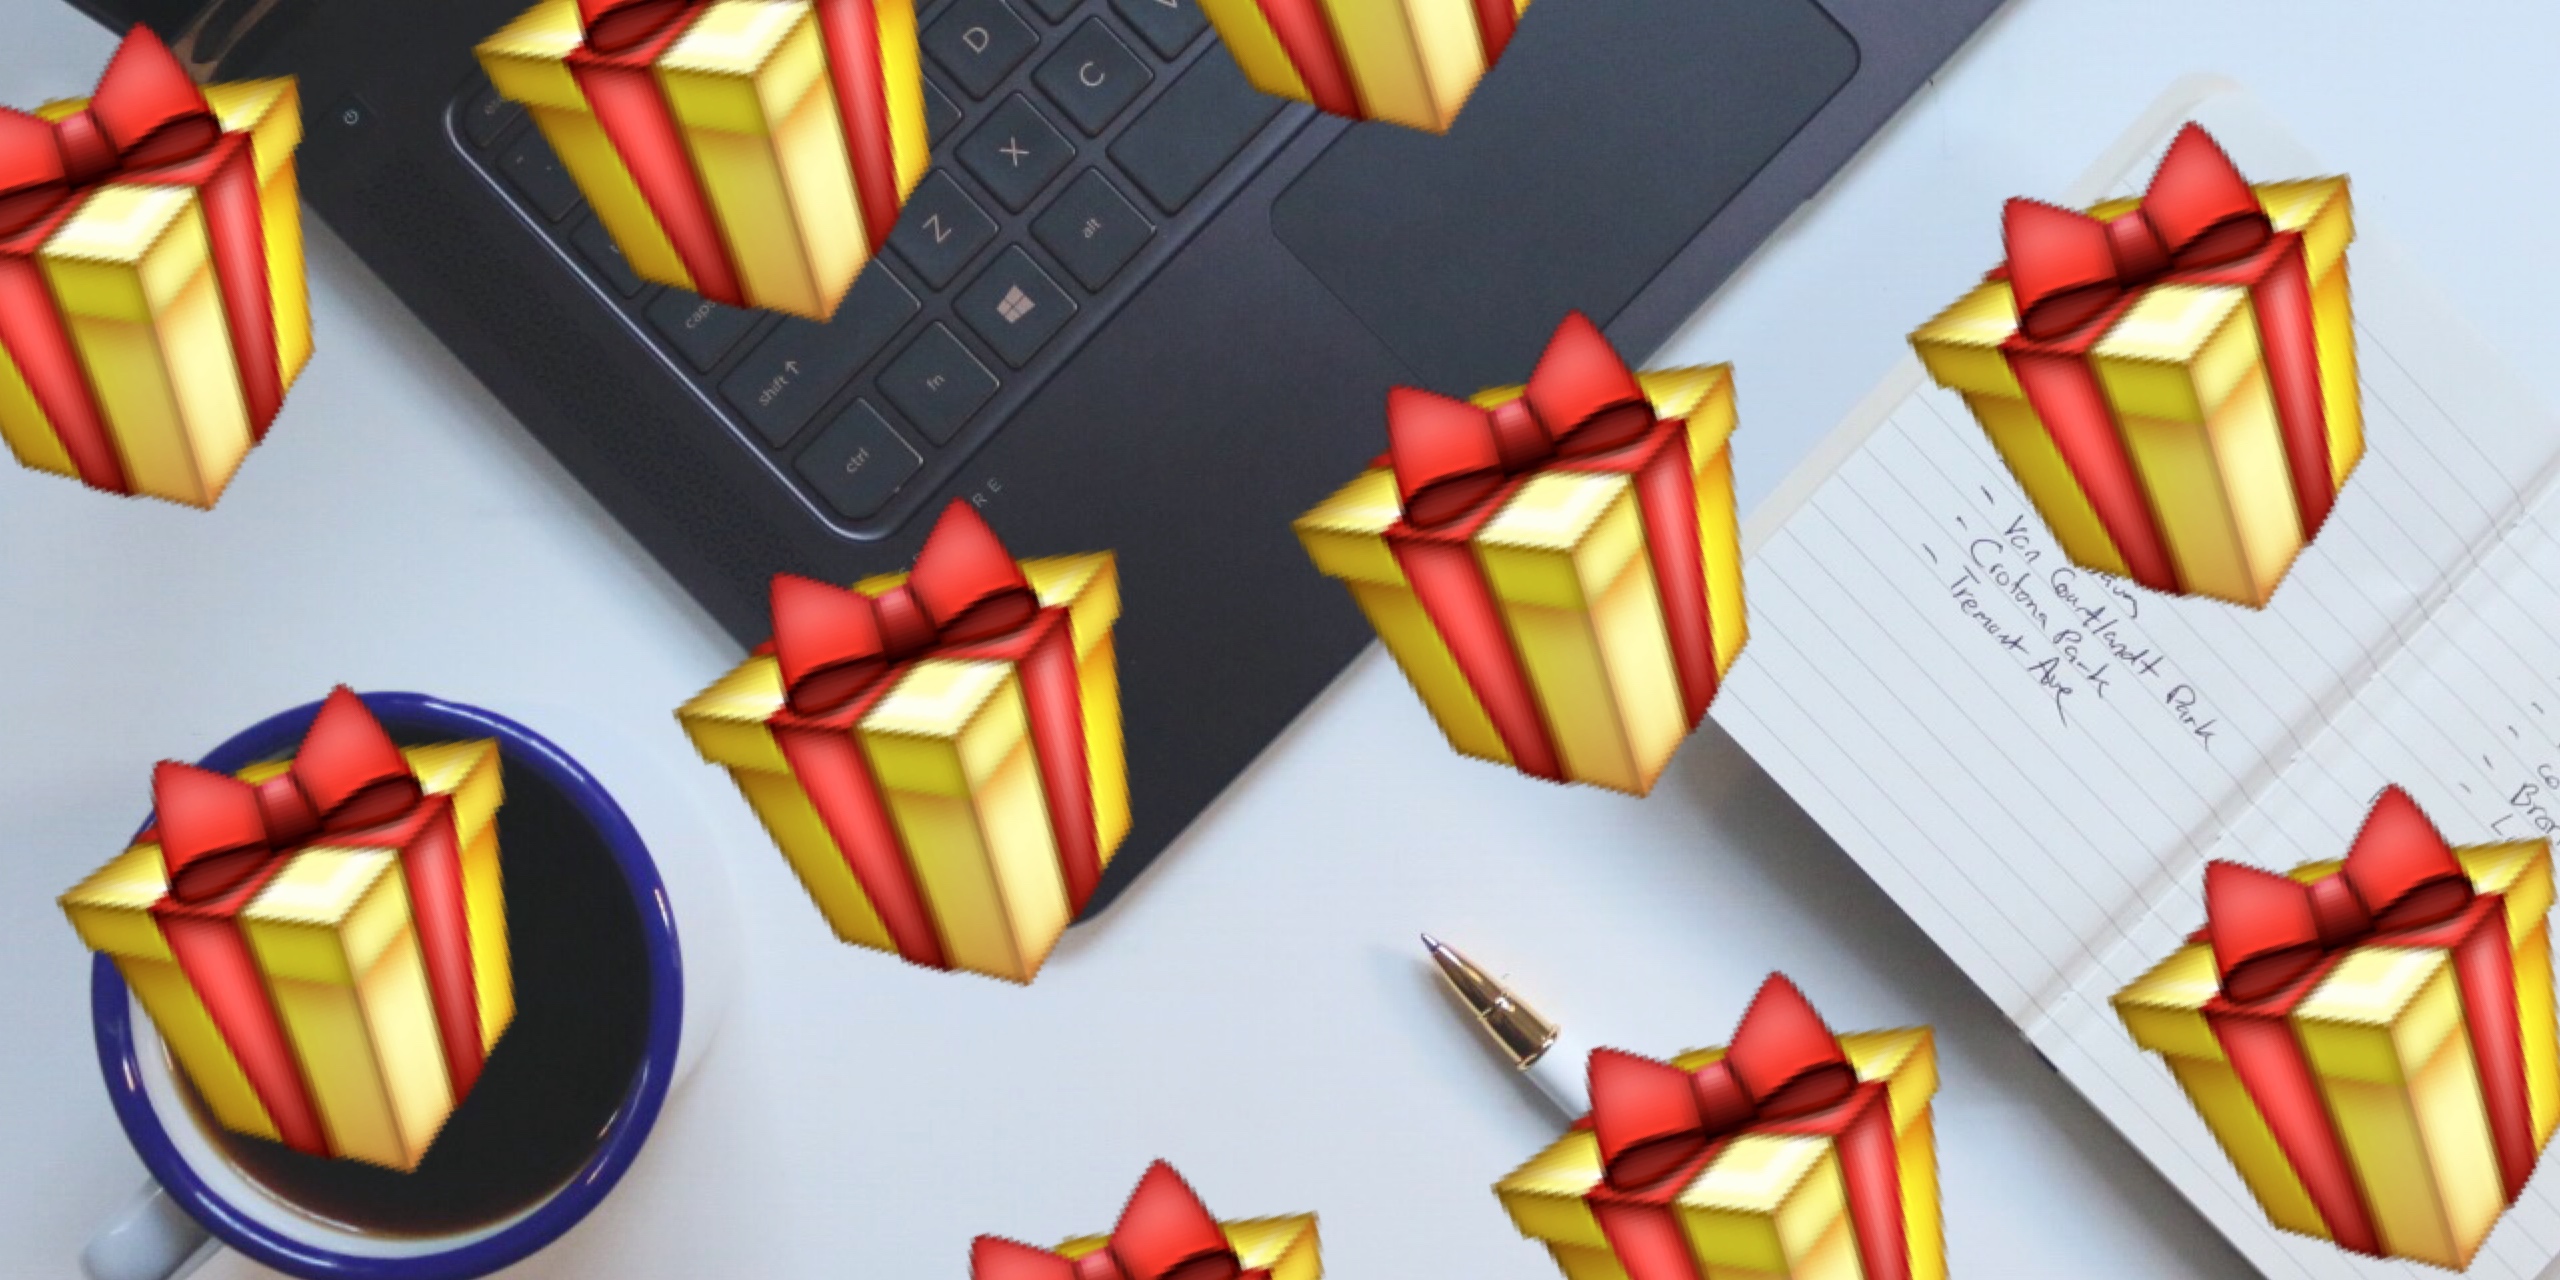 Laptop with gifts on it